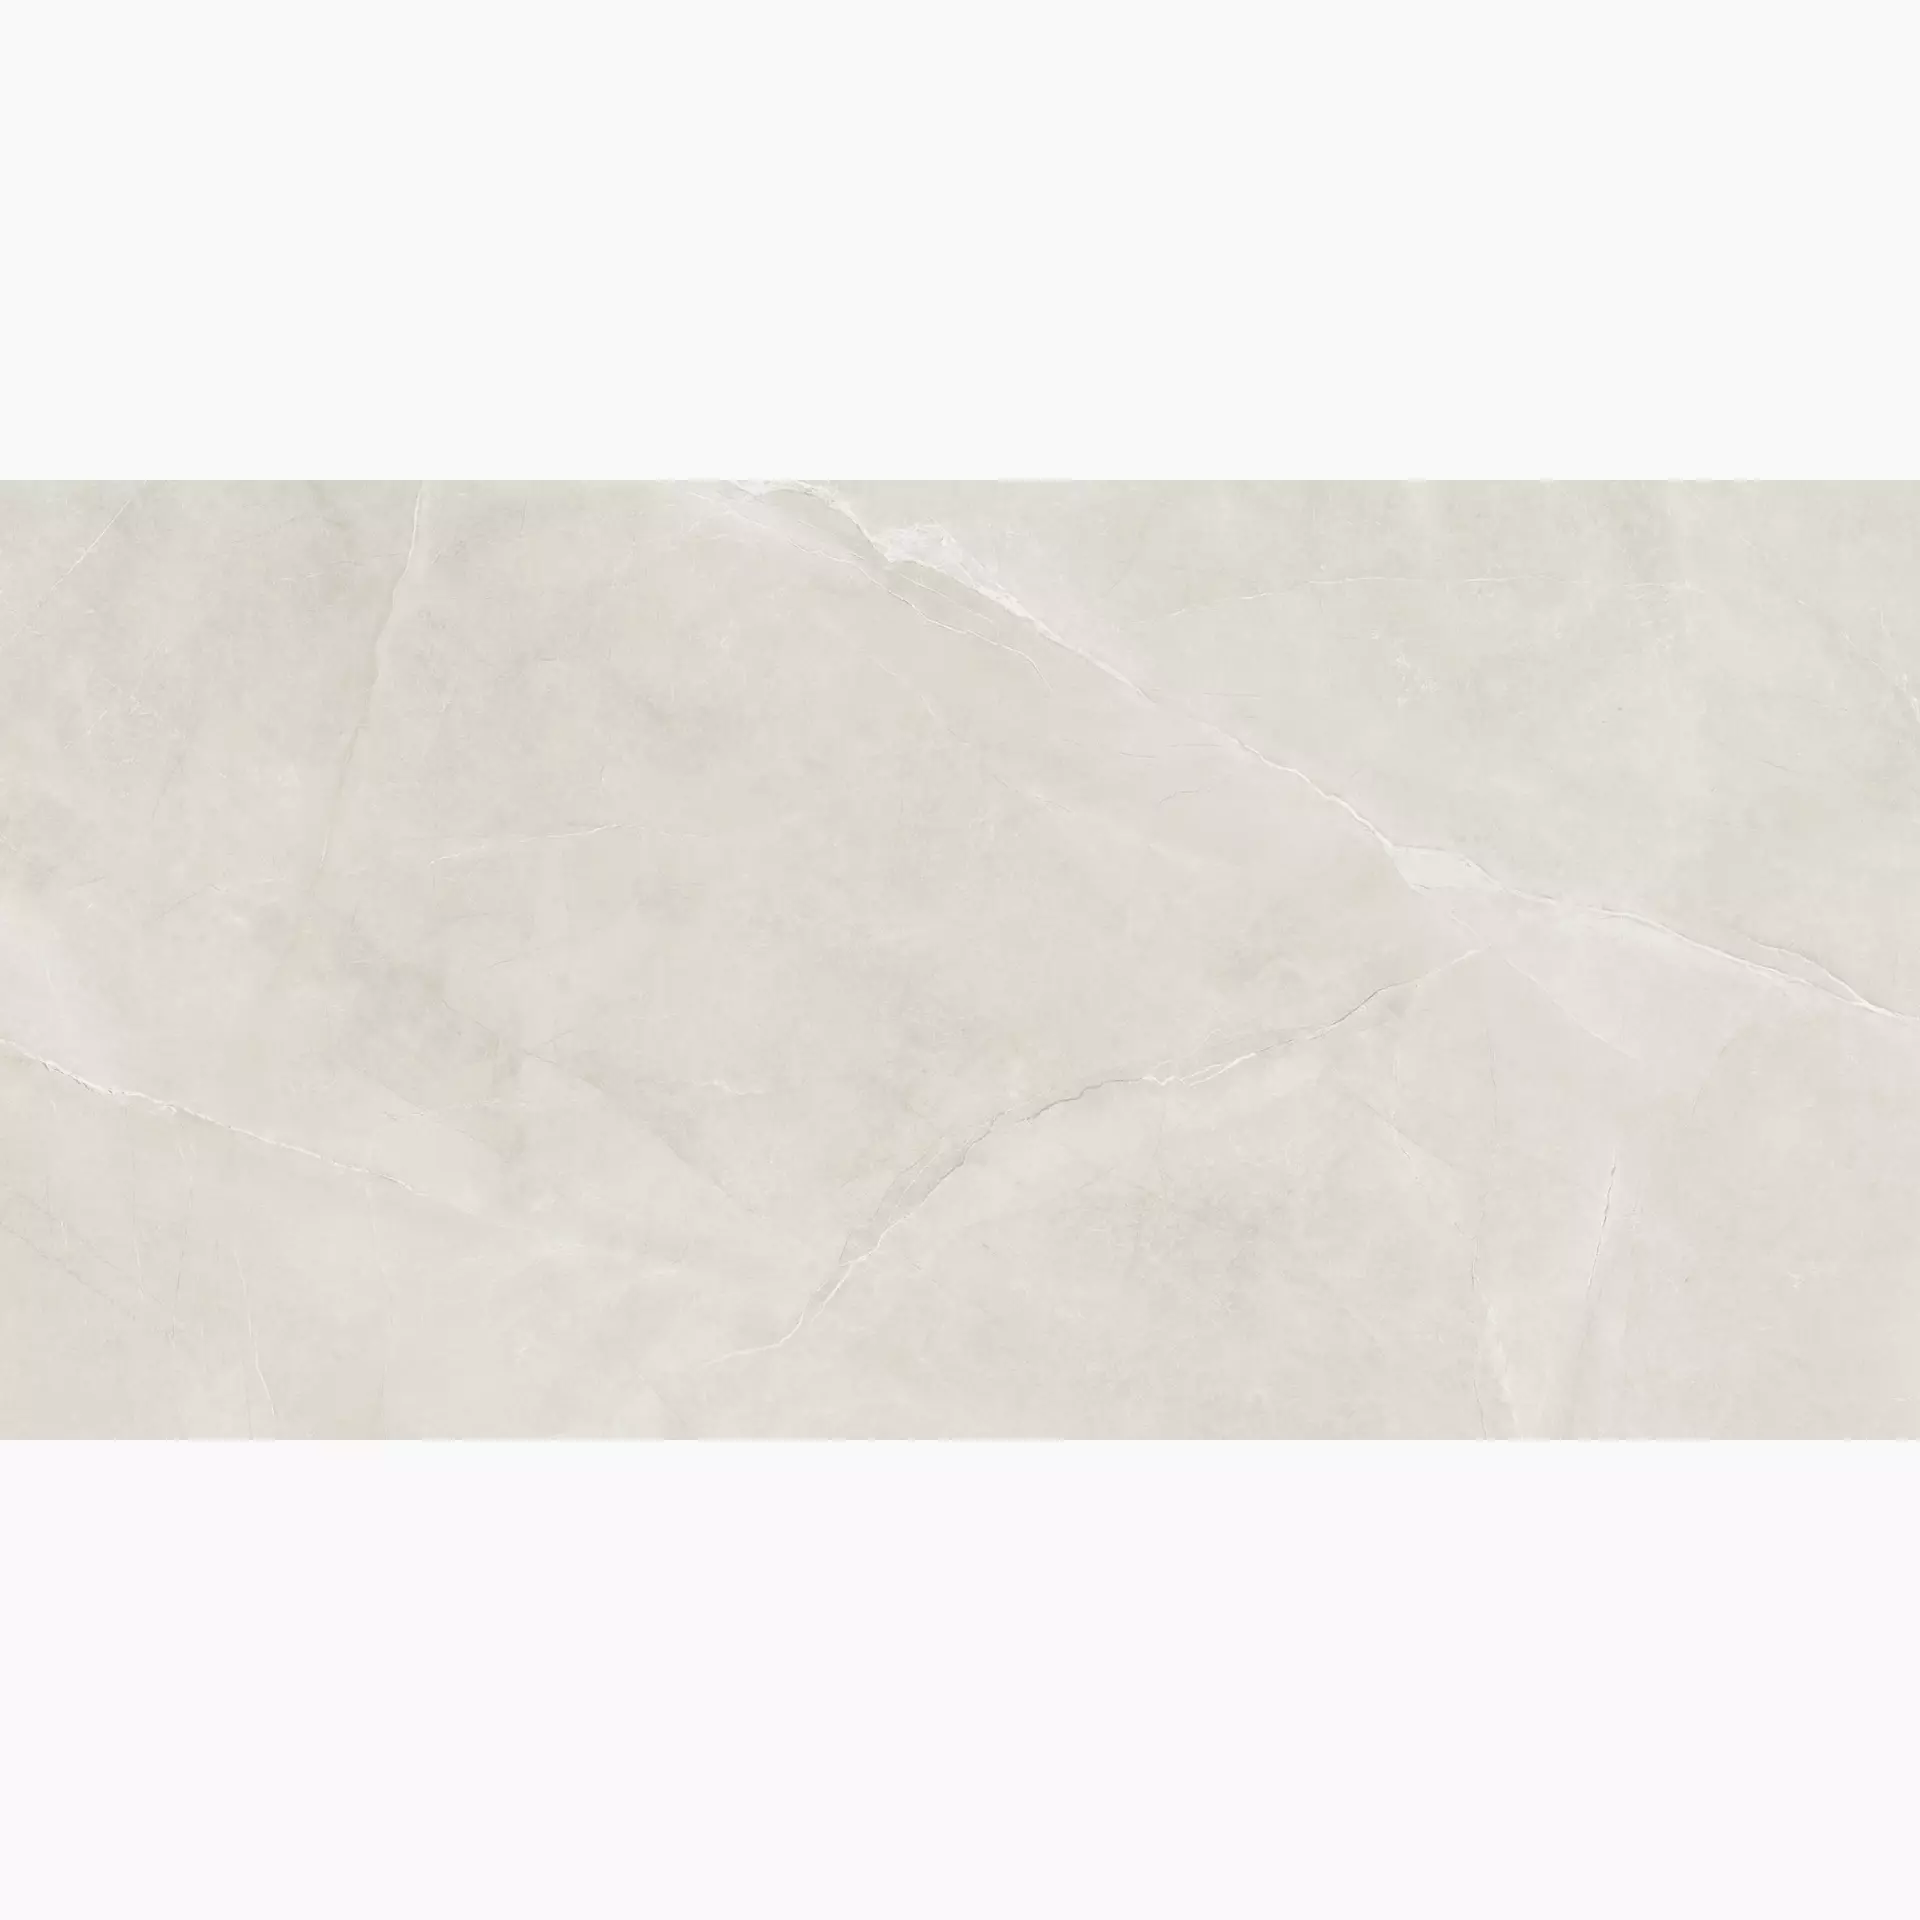 MGM Lux White Levigato LUXWHILEV6012 60x120cm rectified 10mm